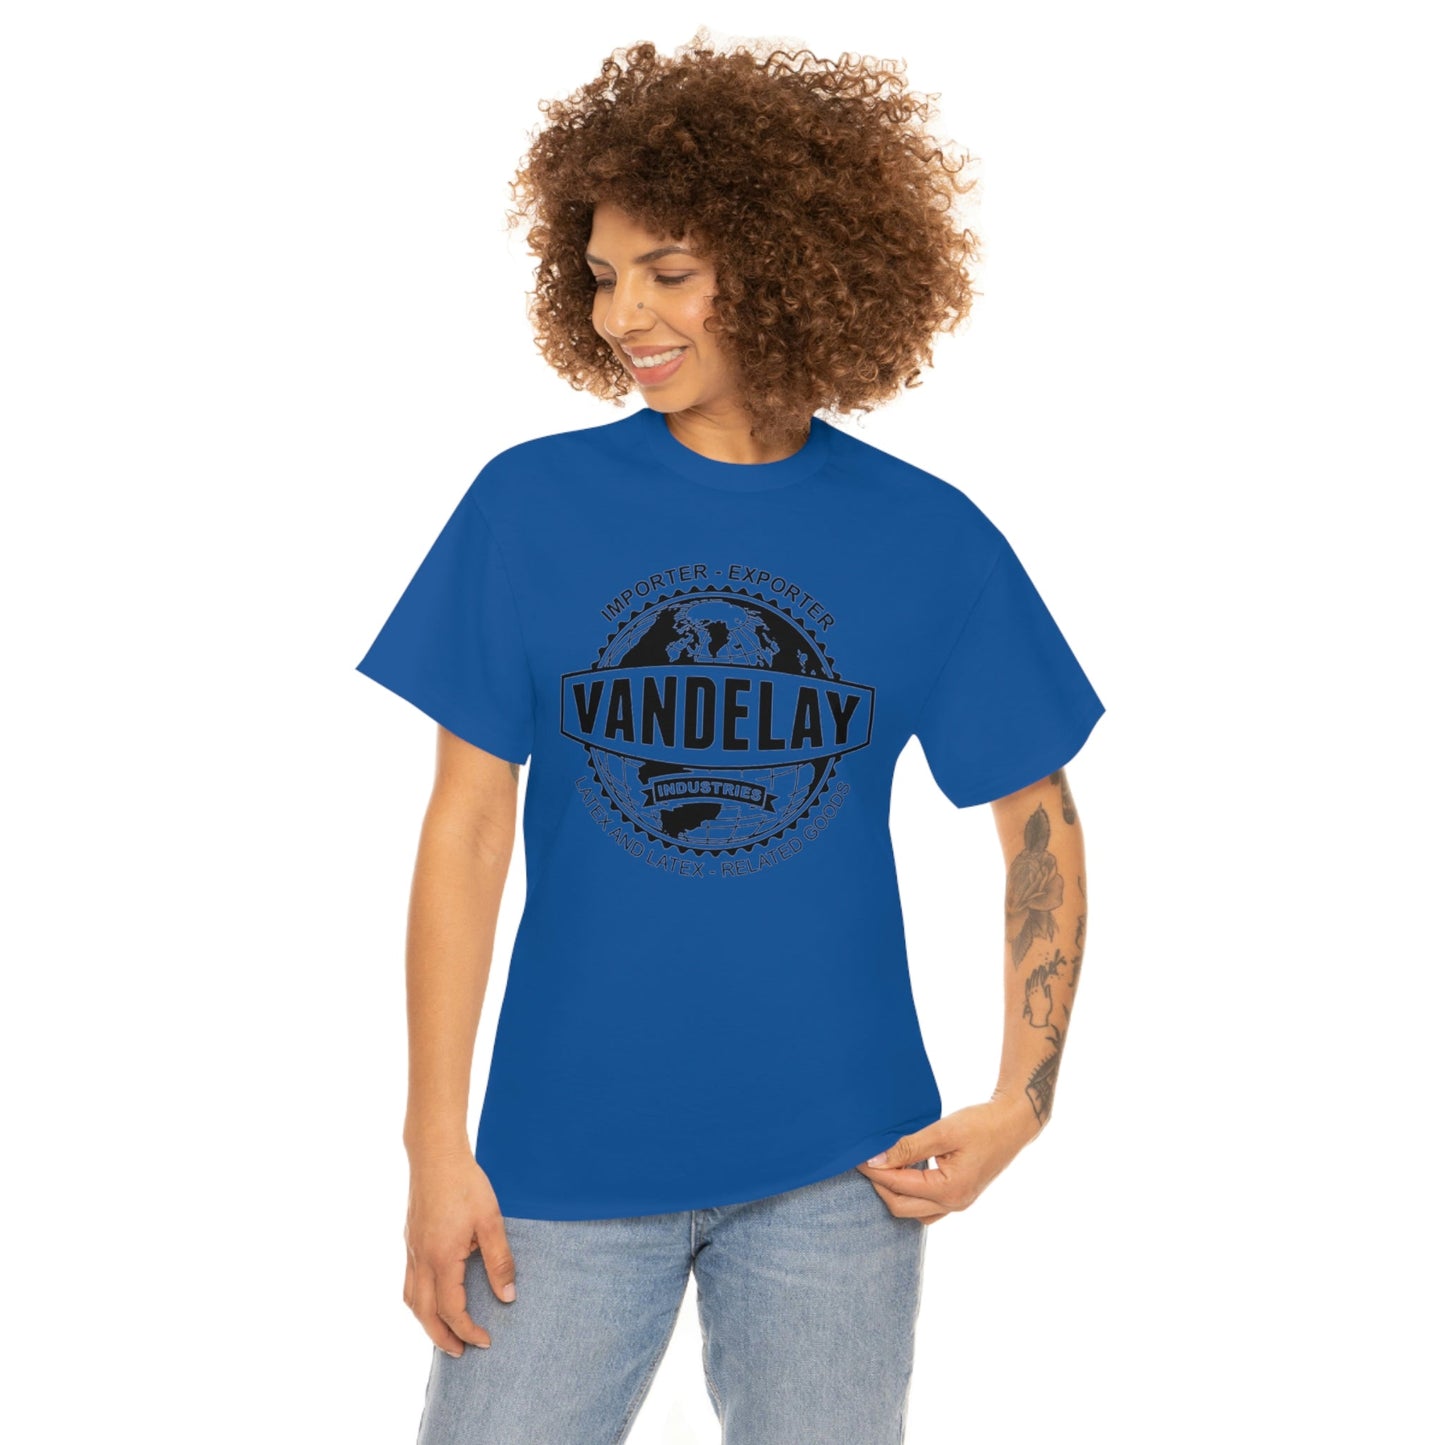 Vandelay Industries T-Shirt - Seinfeld Inspired Tee for Fans of George Costanza's Fake Company - RetroTeeShop